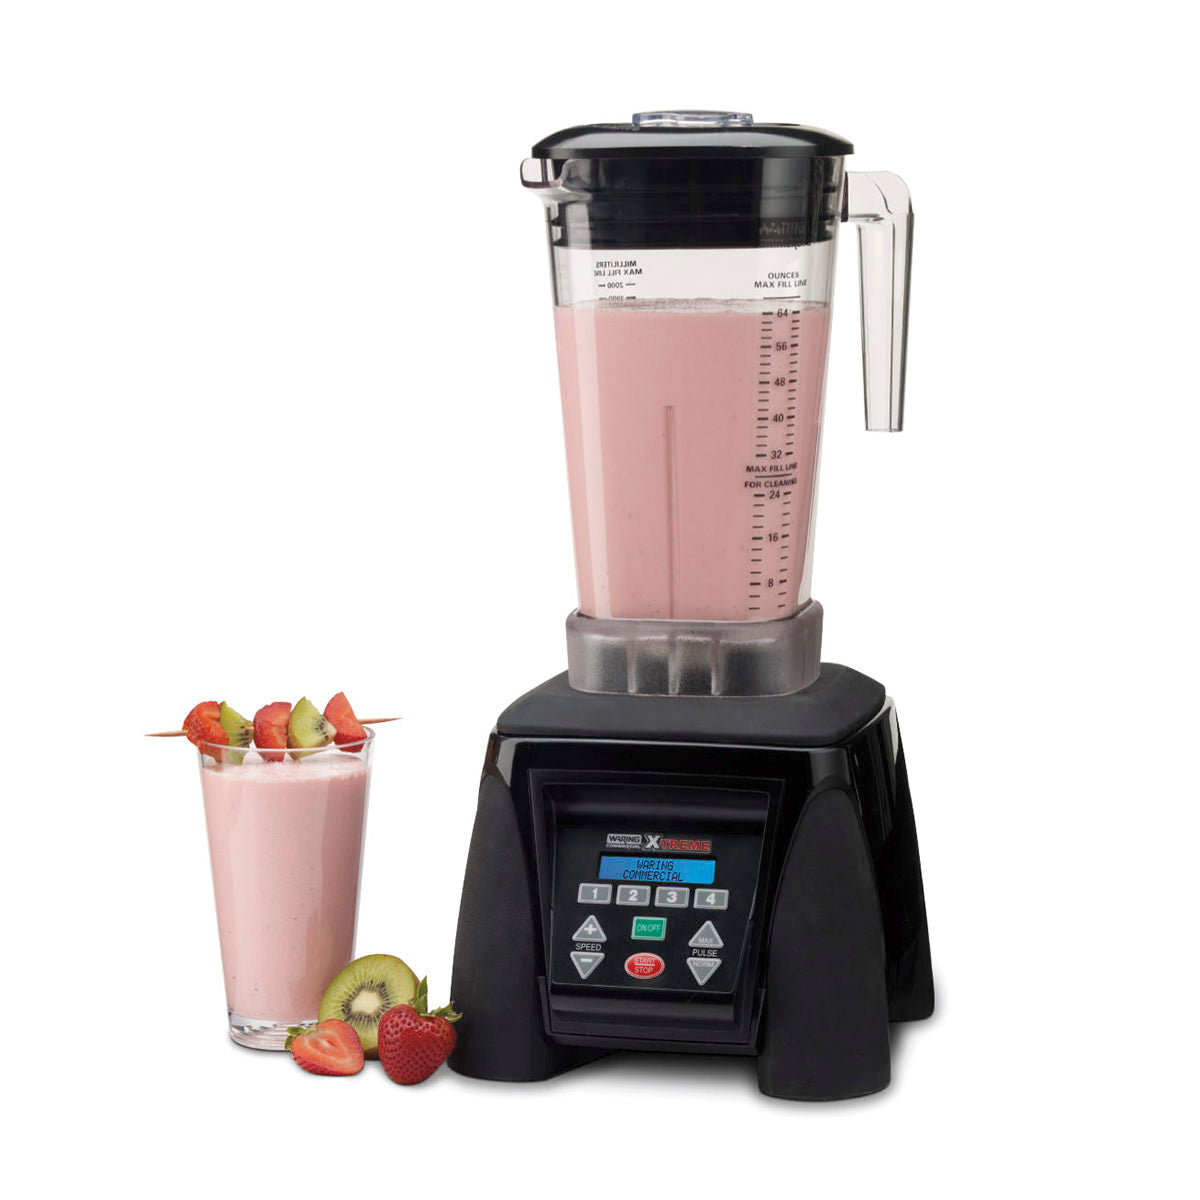 MX1300XTX Heavy-Duty Reprogrammable Blender with "The Raptor" 64 oz Copolyester Jar by Waring Commercial